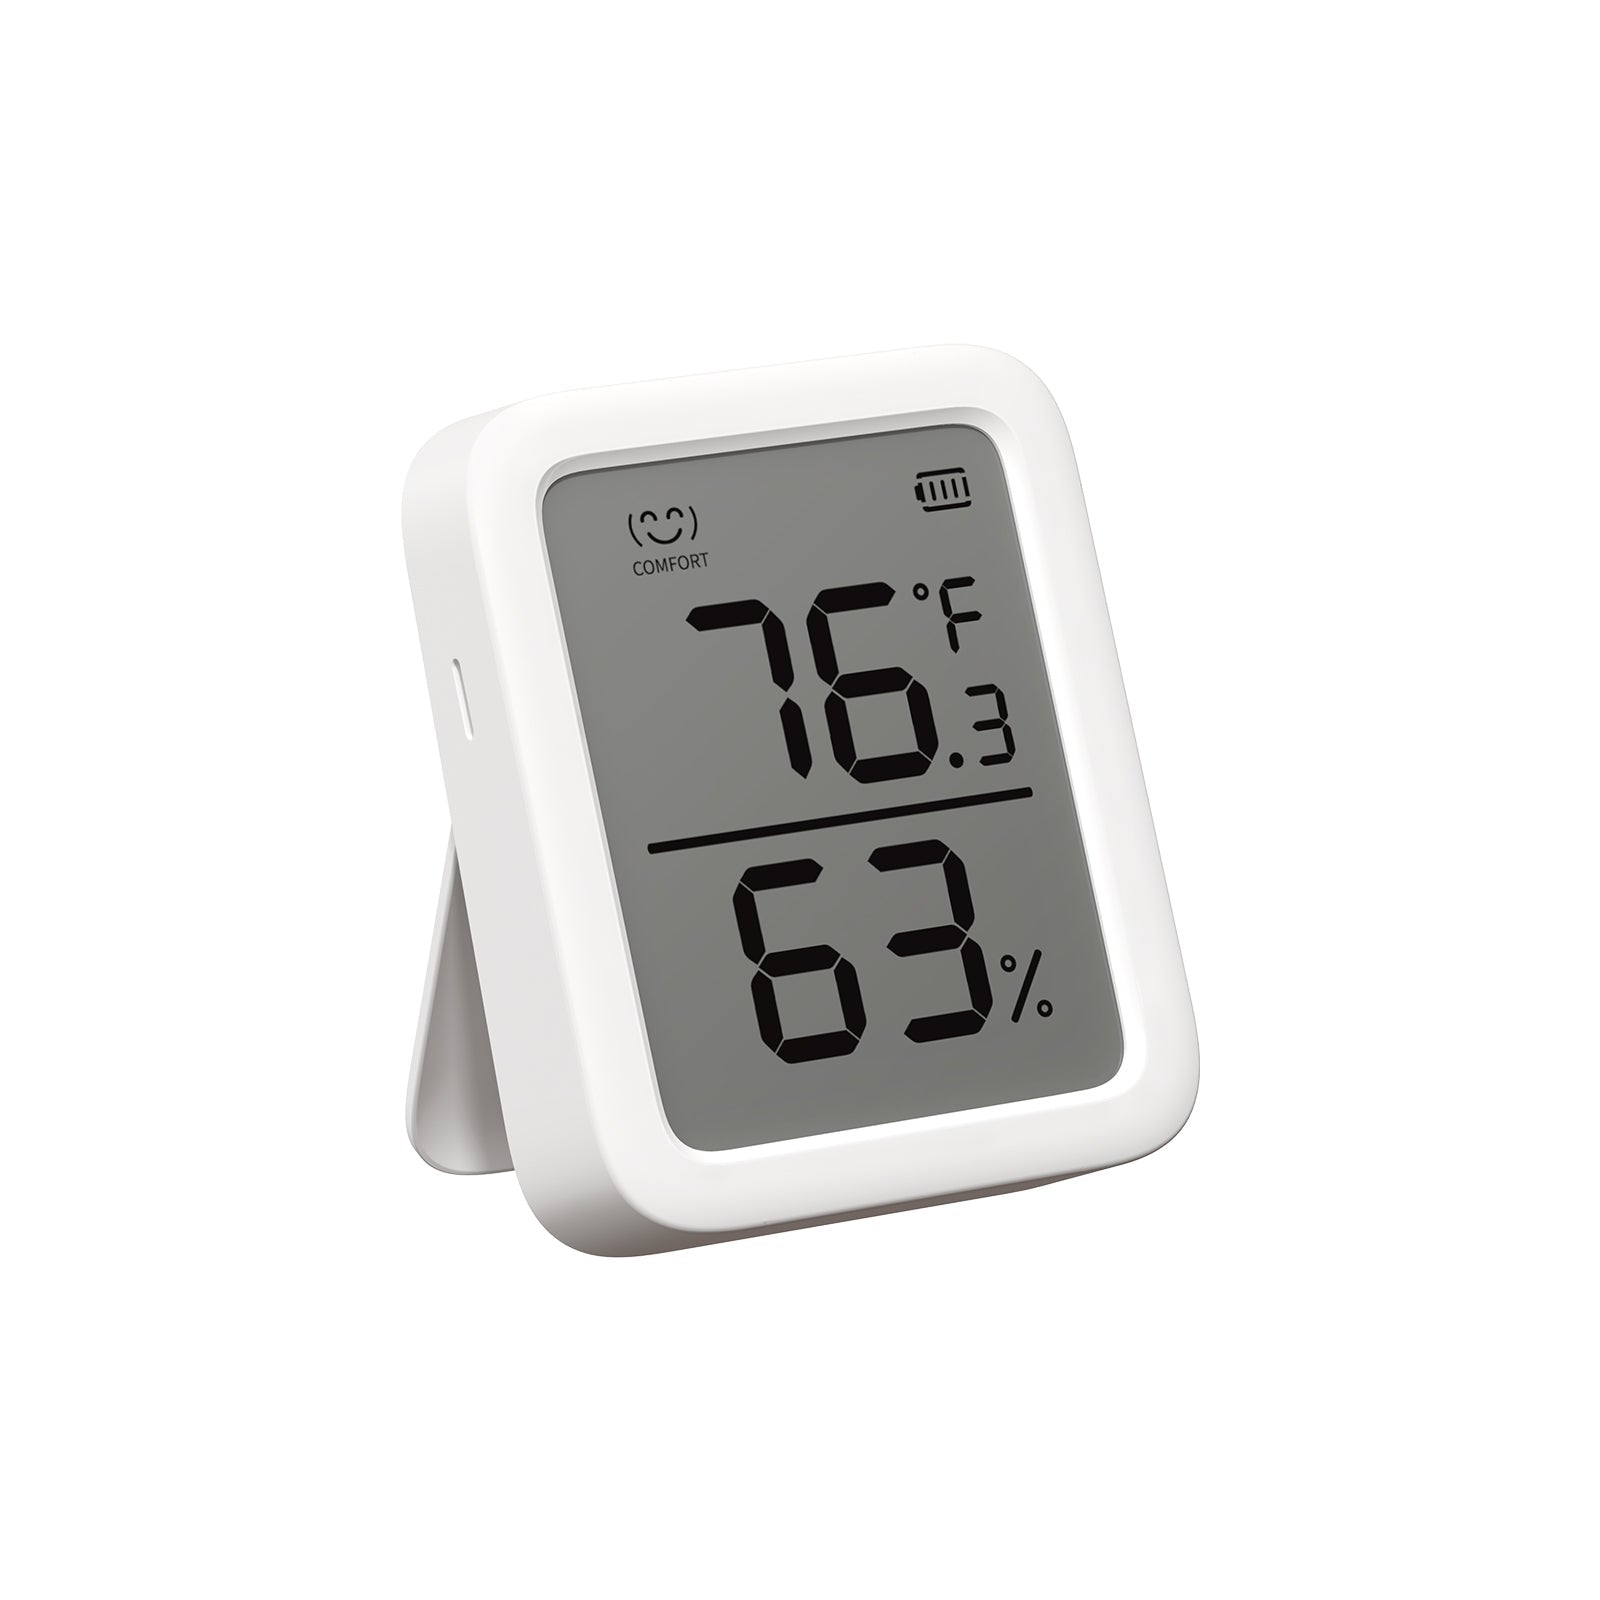 SwitchBot WiFi Hygrometer Thermometer with Hub Mini, IP65 Indoor